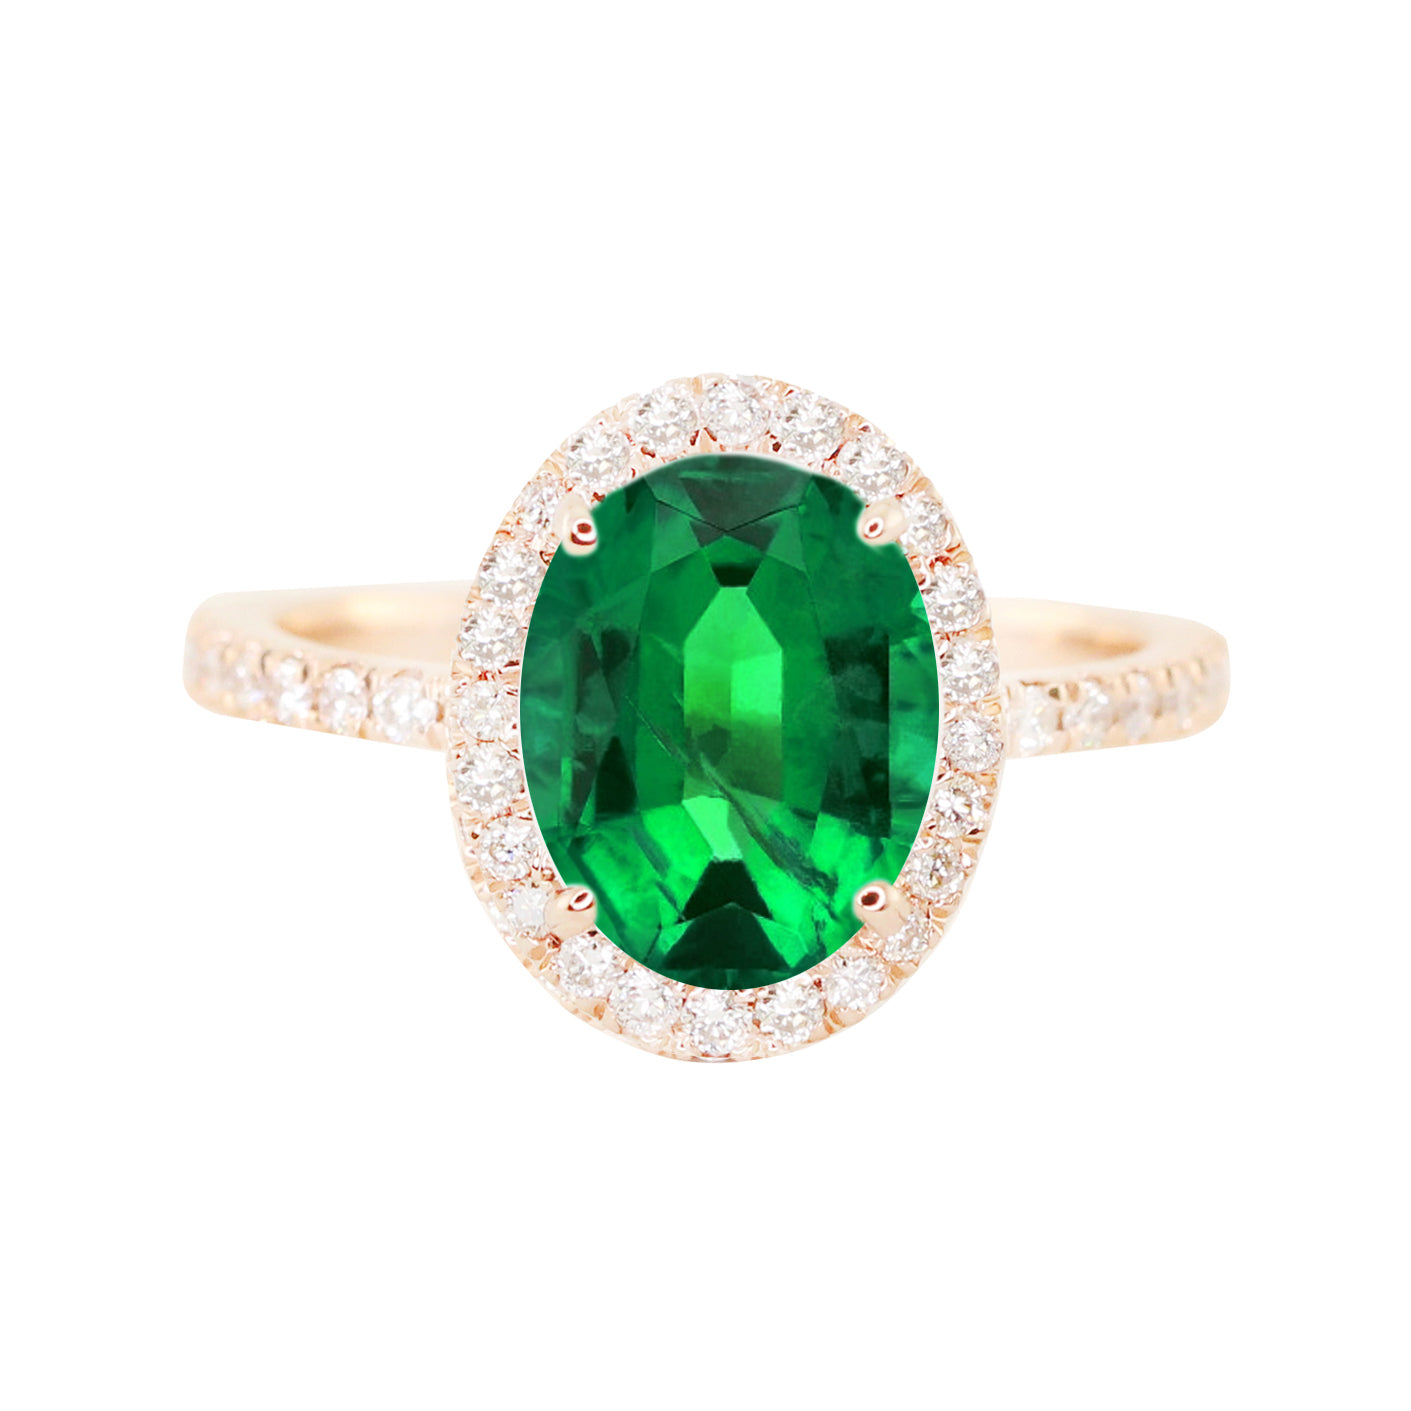 14kt gold and diamond solitaire chrome green tourmaline eternity ring with halo - Luna Skye